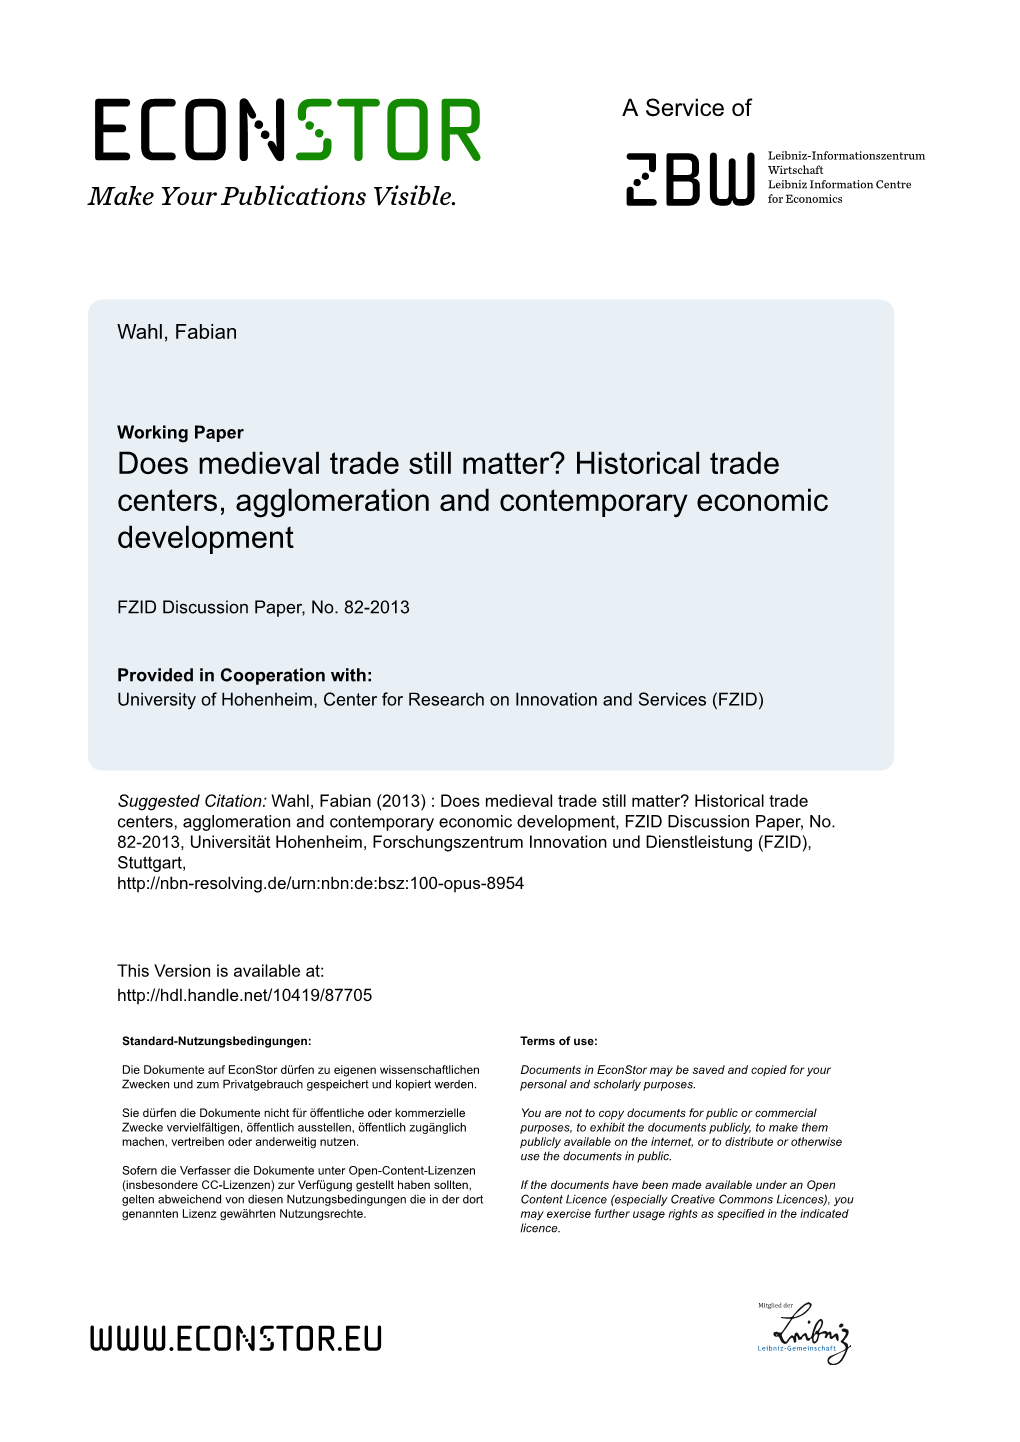 Does Medieval Trade Still Matter? Historical Trade Centers, Agglomeration and Contemporary Economic Development